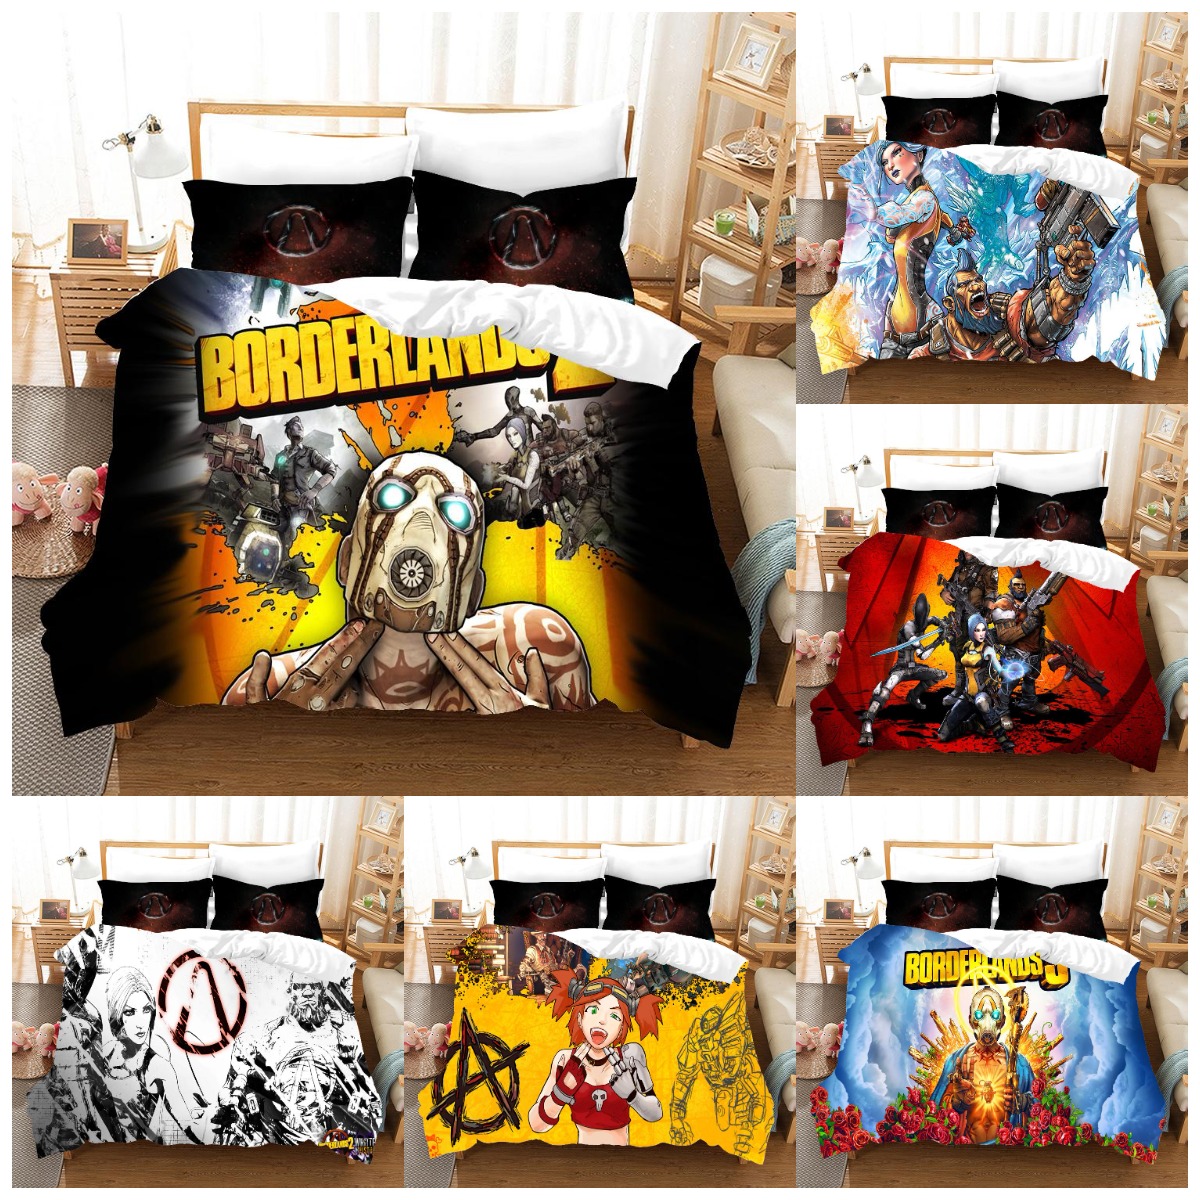 Bedding Sets Anime Cartoon Borderlands Theme 3D Printing Duvet Cover Set 3 PCS European and America Style Polyester Super Soft Quilt Cover with Pillowcase Full size